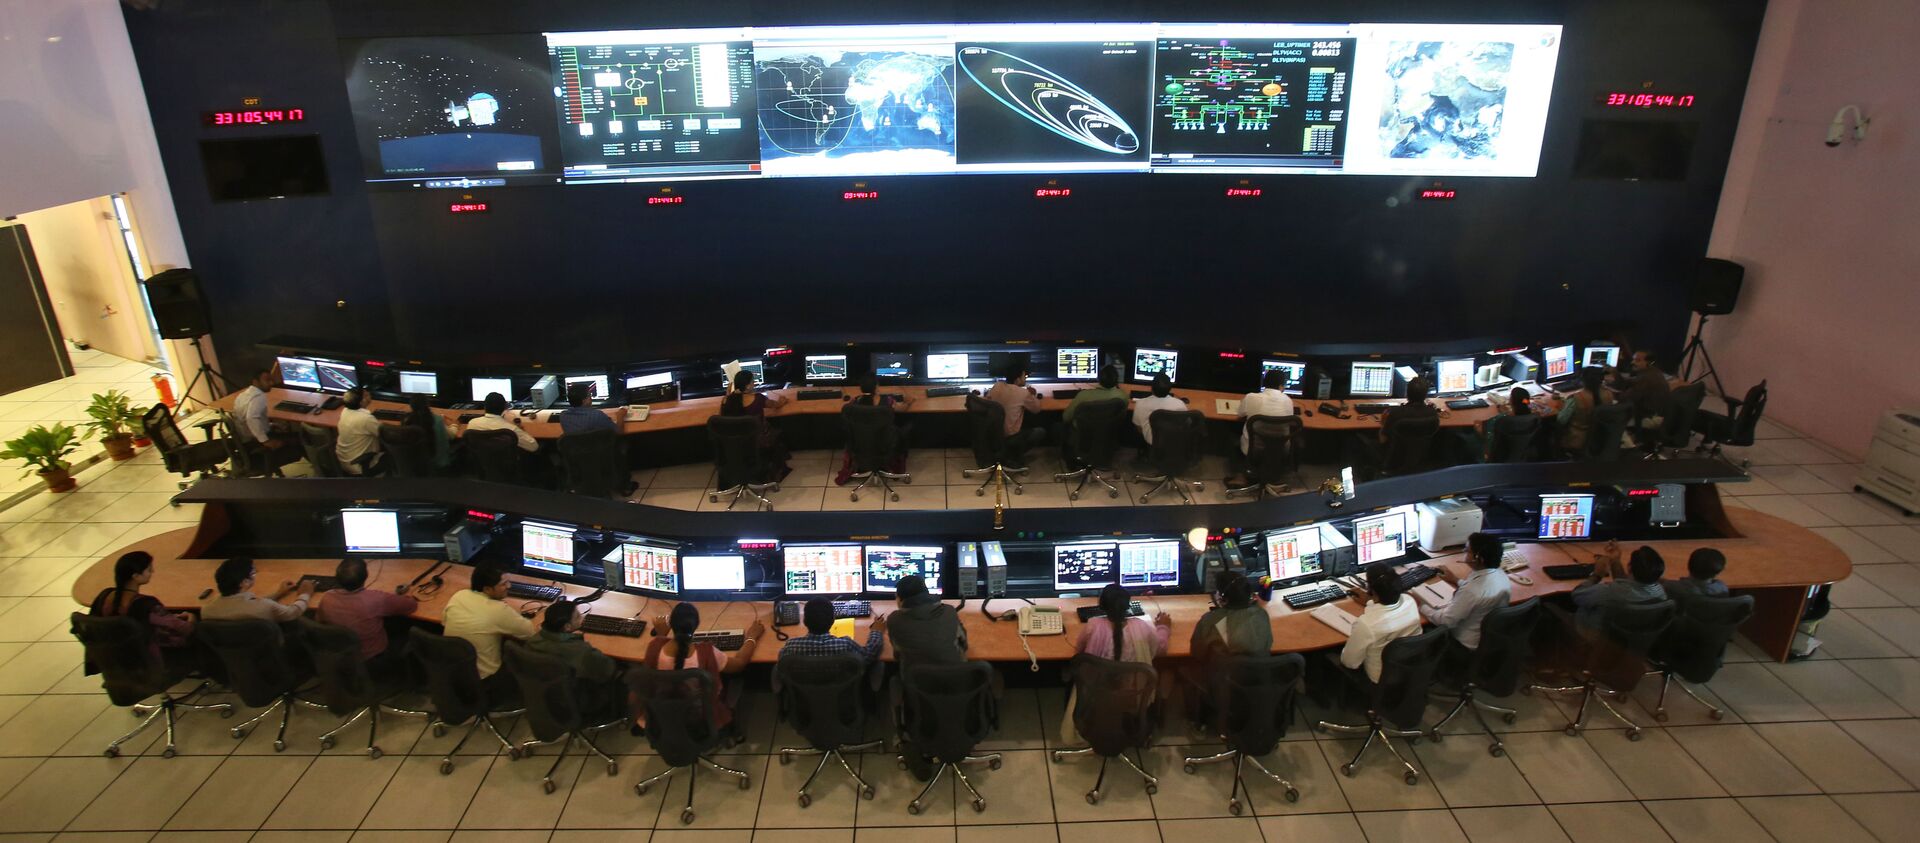 Indian Space Research Organization (ISRO) scientists and engineers monitor the movements of India's Mars orbiter at their Spacecraft Control Centre in Bangalore, India (File) - Sputnik International, 1920, 27.11.2019